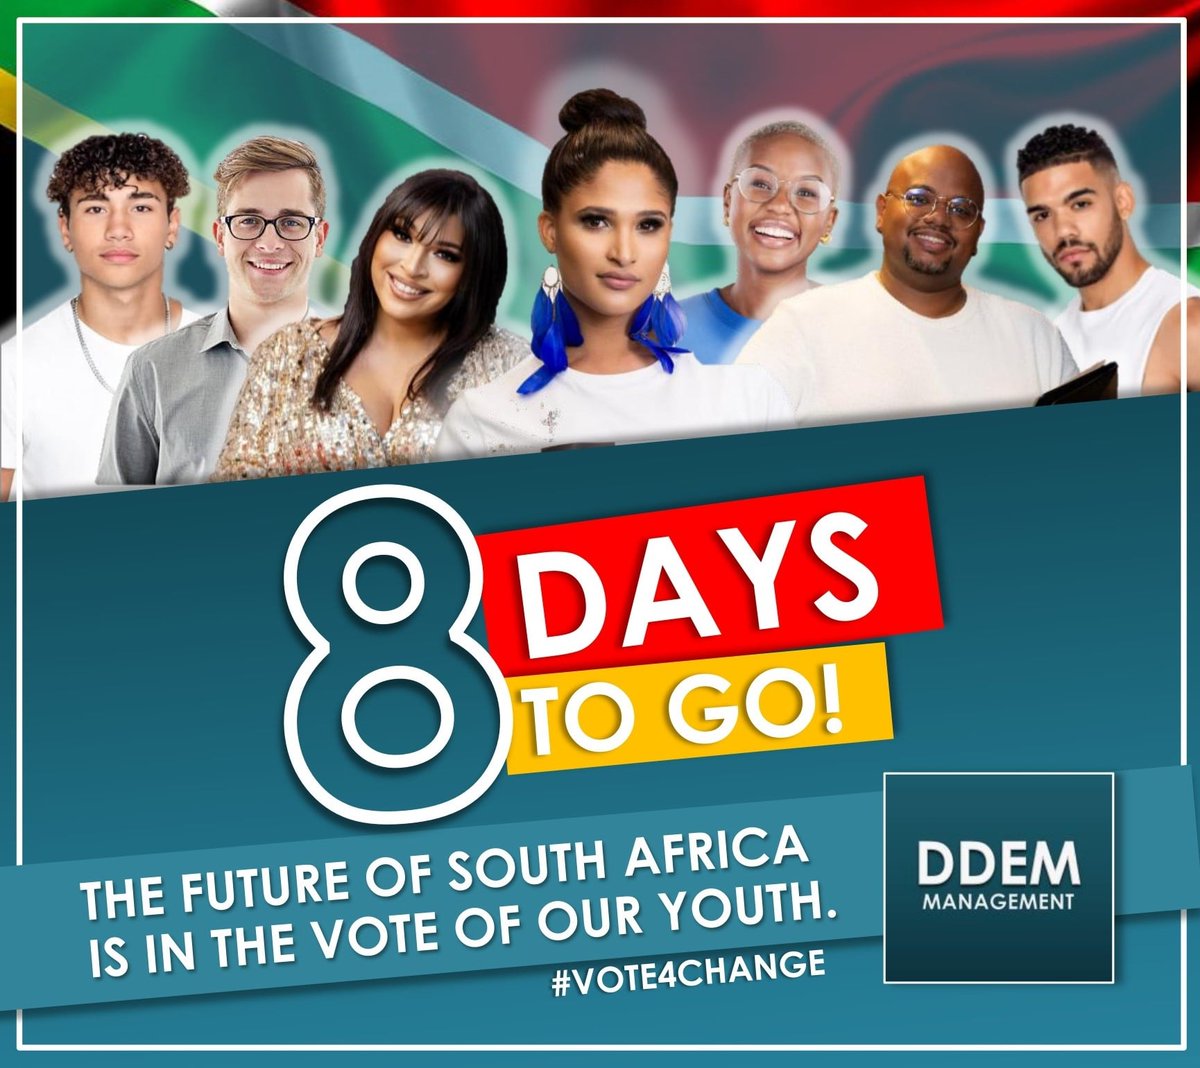 We call on all registered young people of our beautiful rainbow nation to practice their #right2vote on Wednesday, 29 May and vote for change. 

The future of South Africa is in the VOTE of our YOUTH. #Vote4Change #SaveSA #theddembrand #ddemmanagement